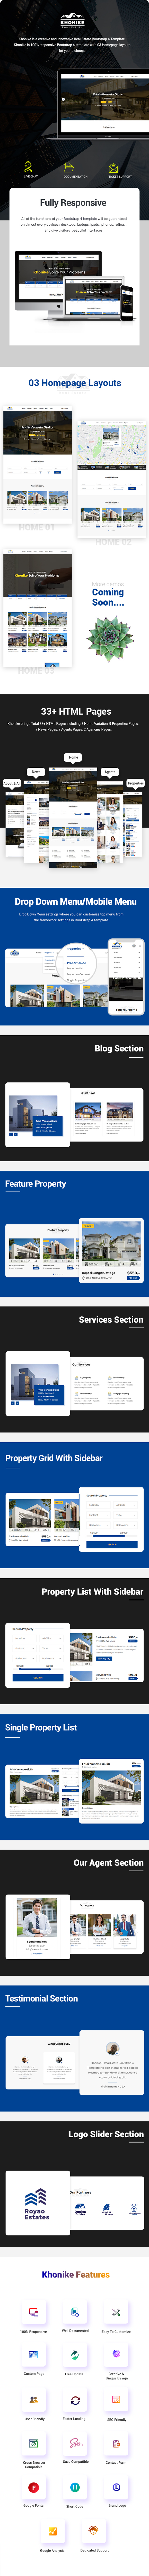 Khonike - Real Estate Bootstrap 4 Template - 1